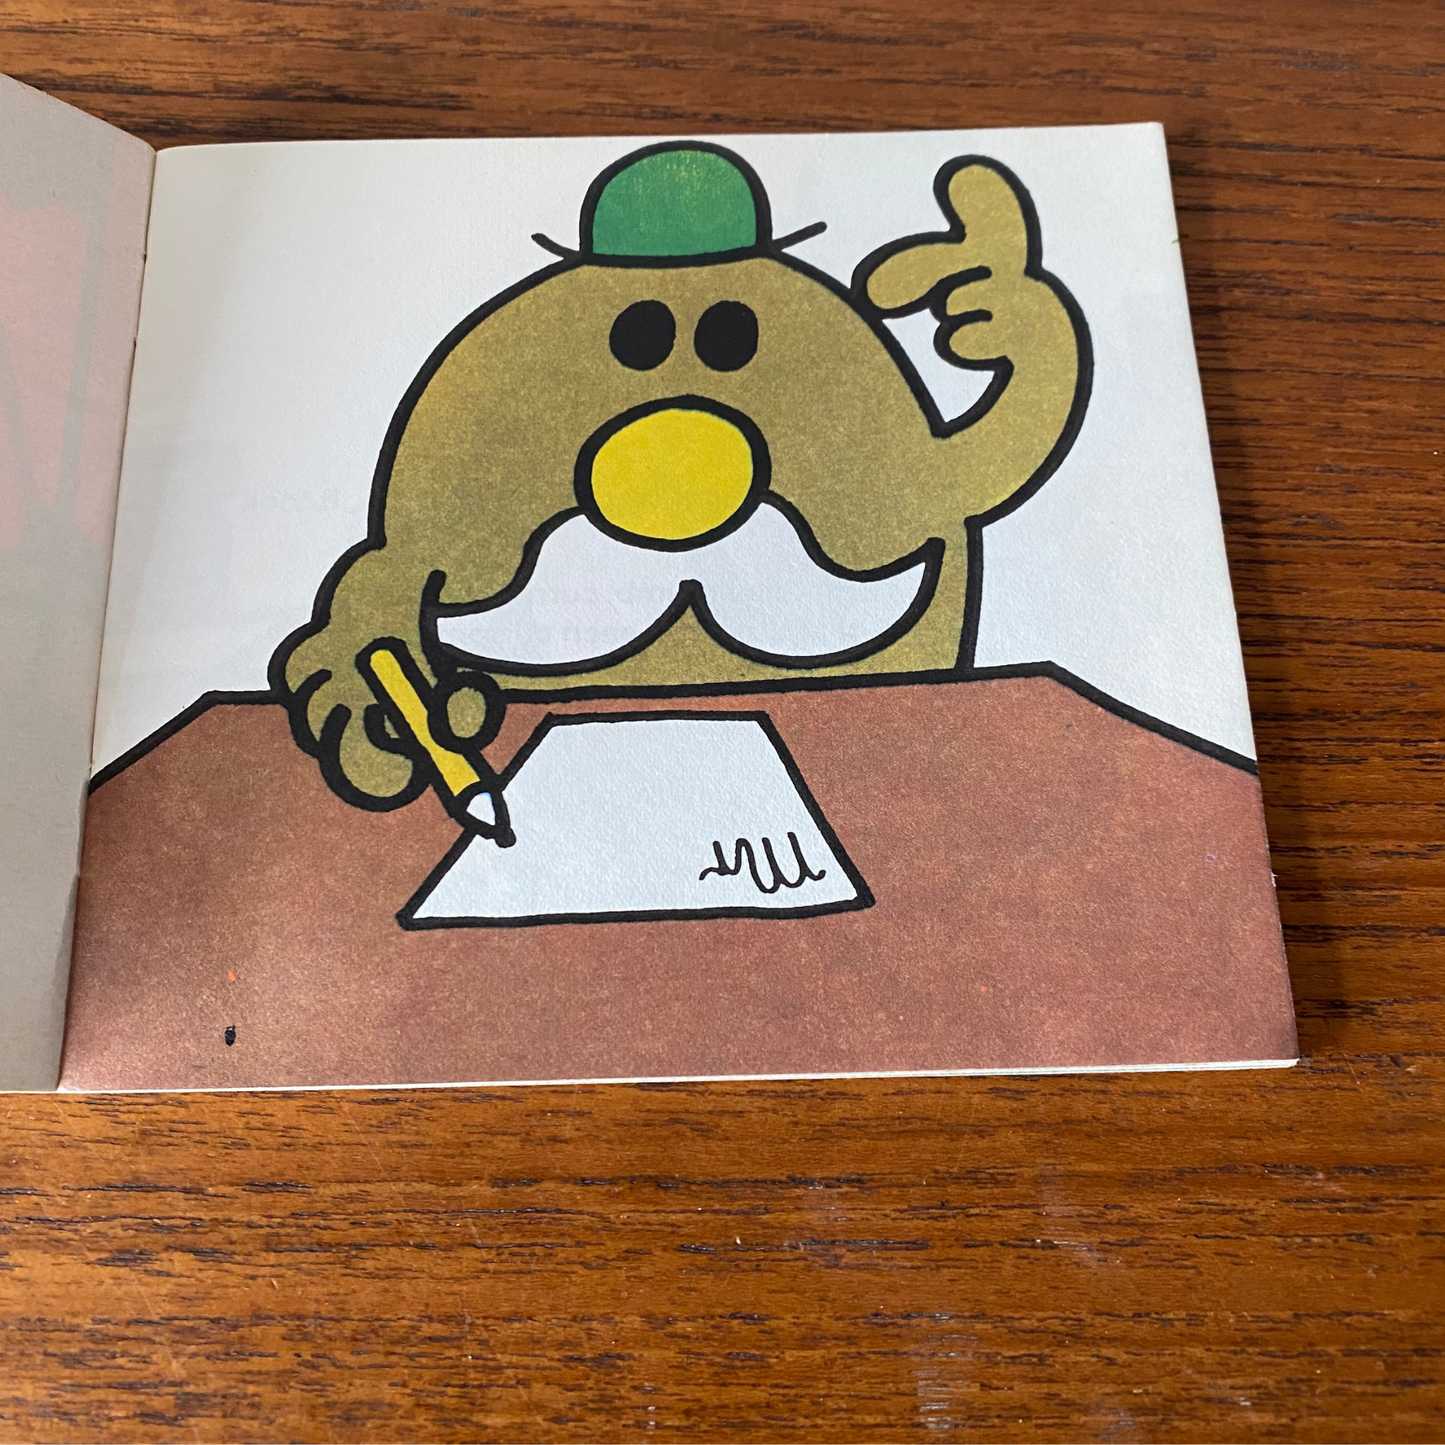 Mr. Slow by Roger Hargreaves. Original 1970s The Mr Men series.1978 edition. Great gift idea